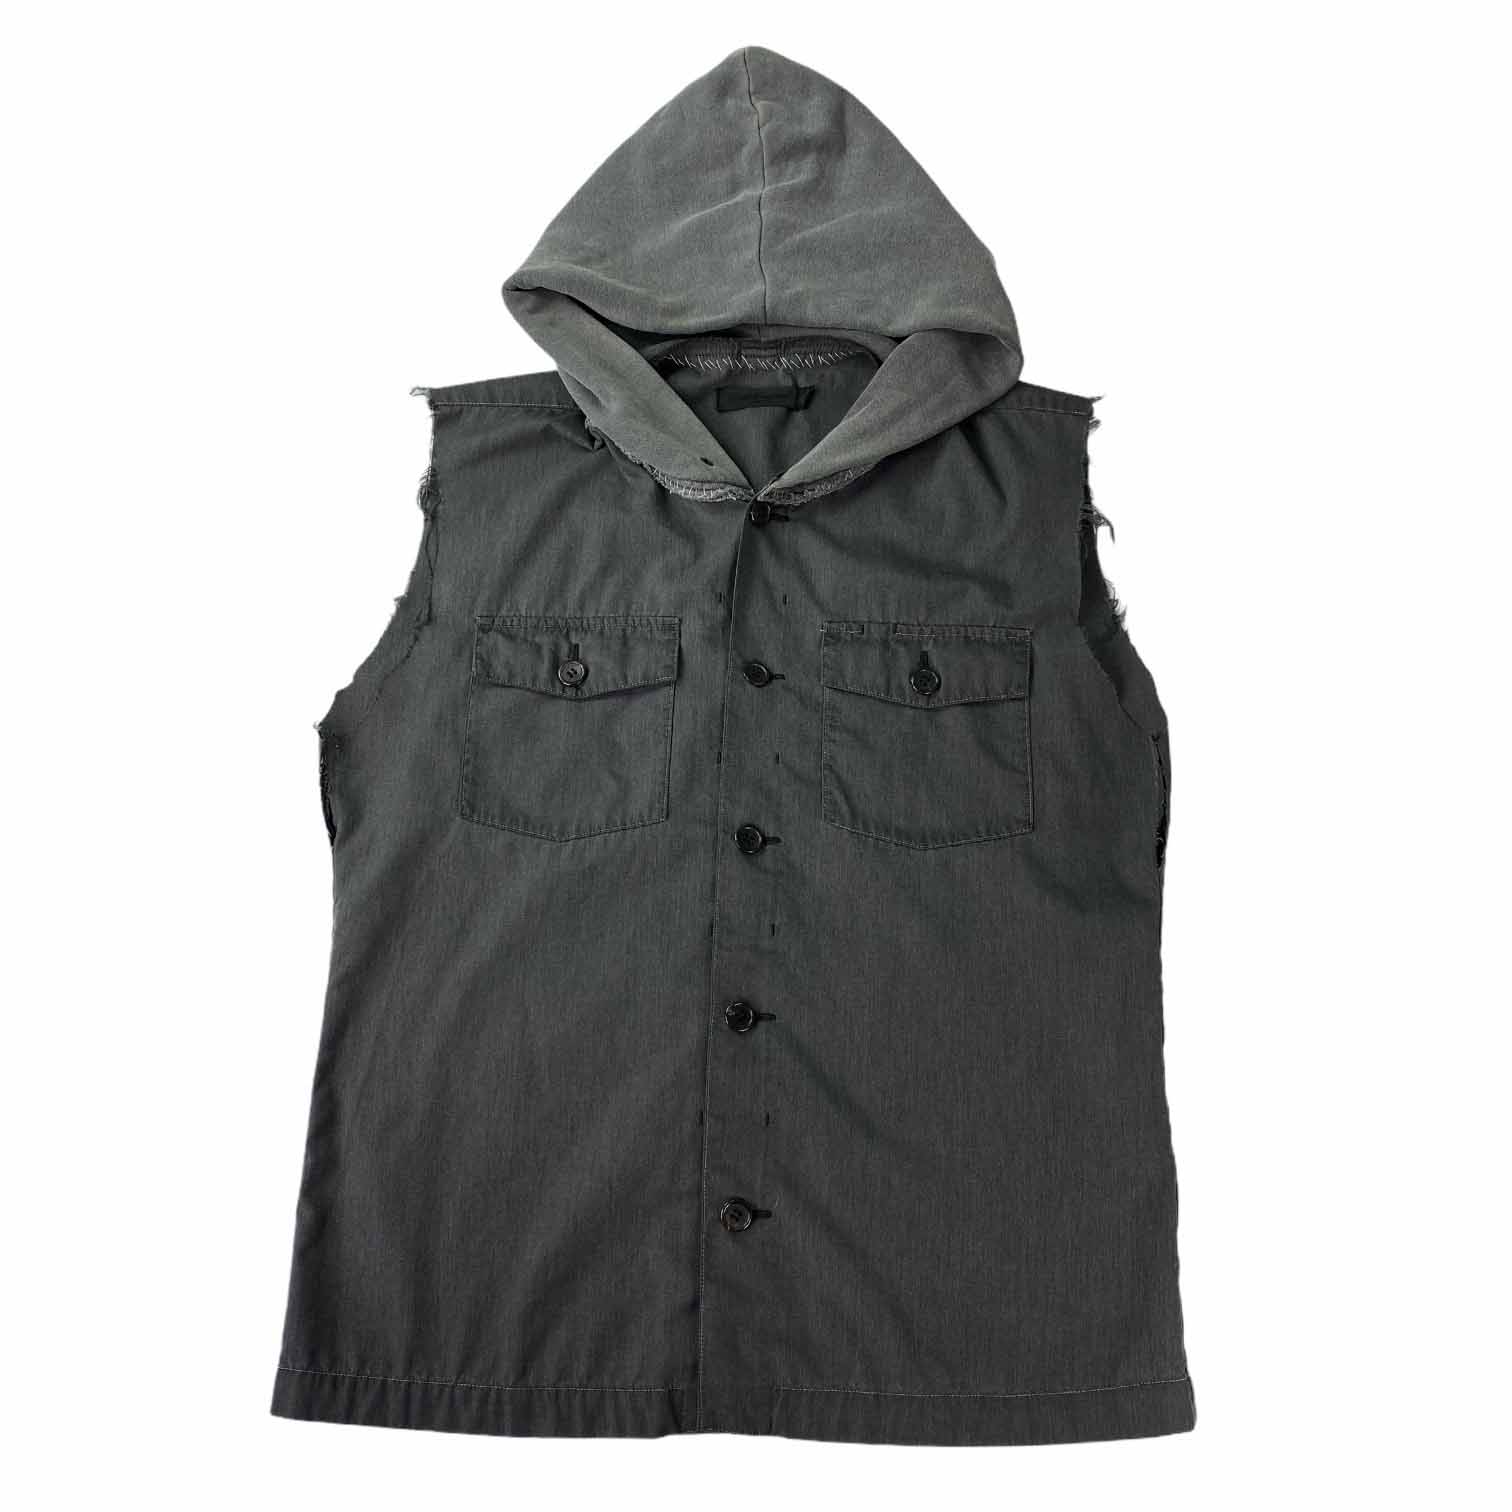 [Undercover] 03 Archive Hoodie Vest - Size M